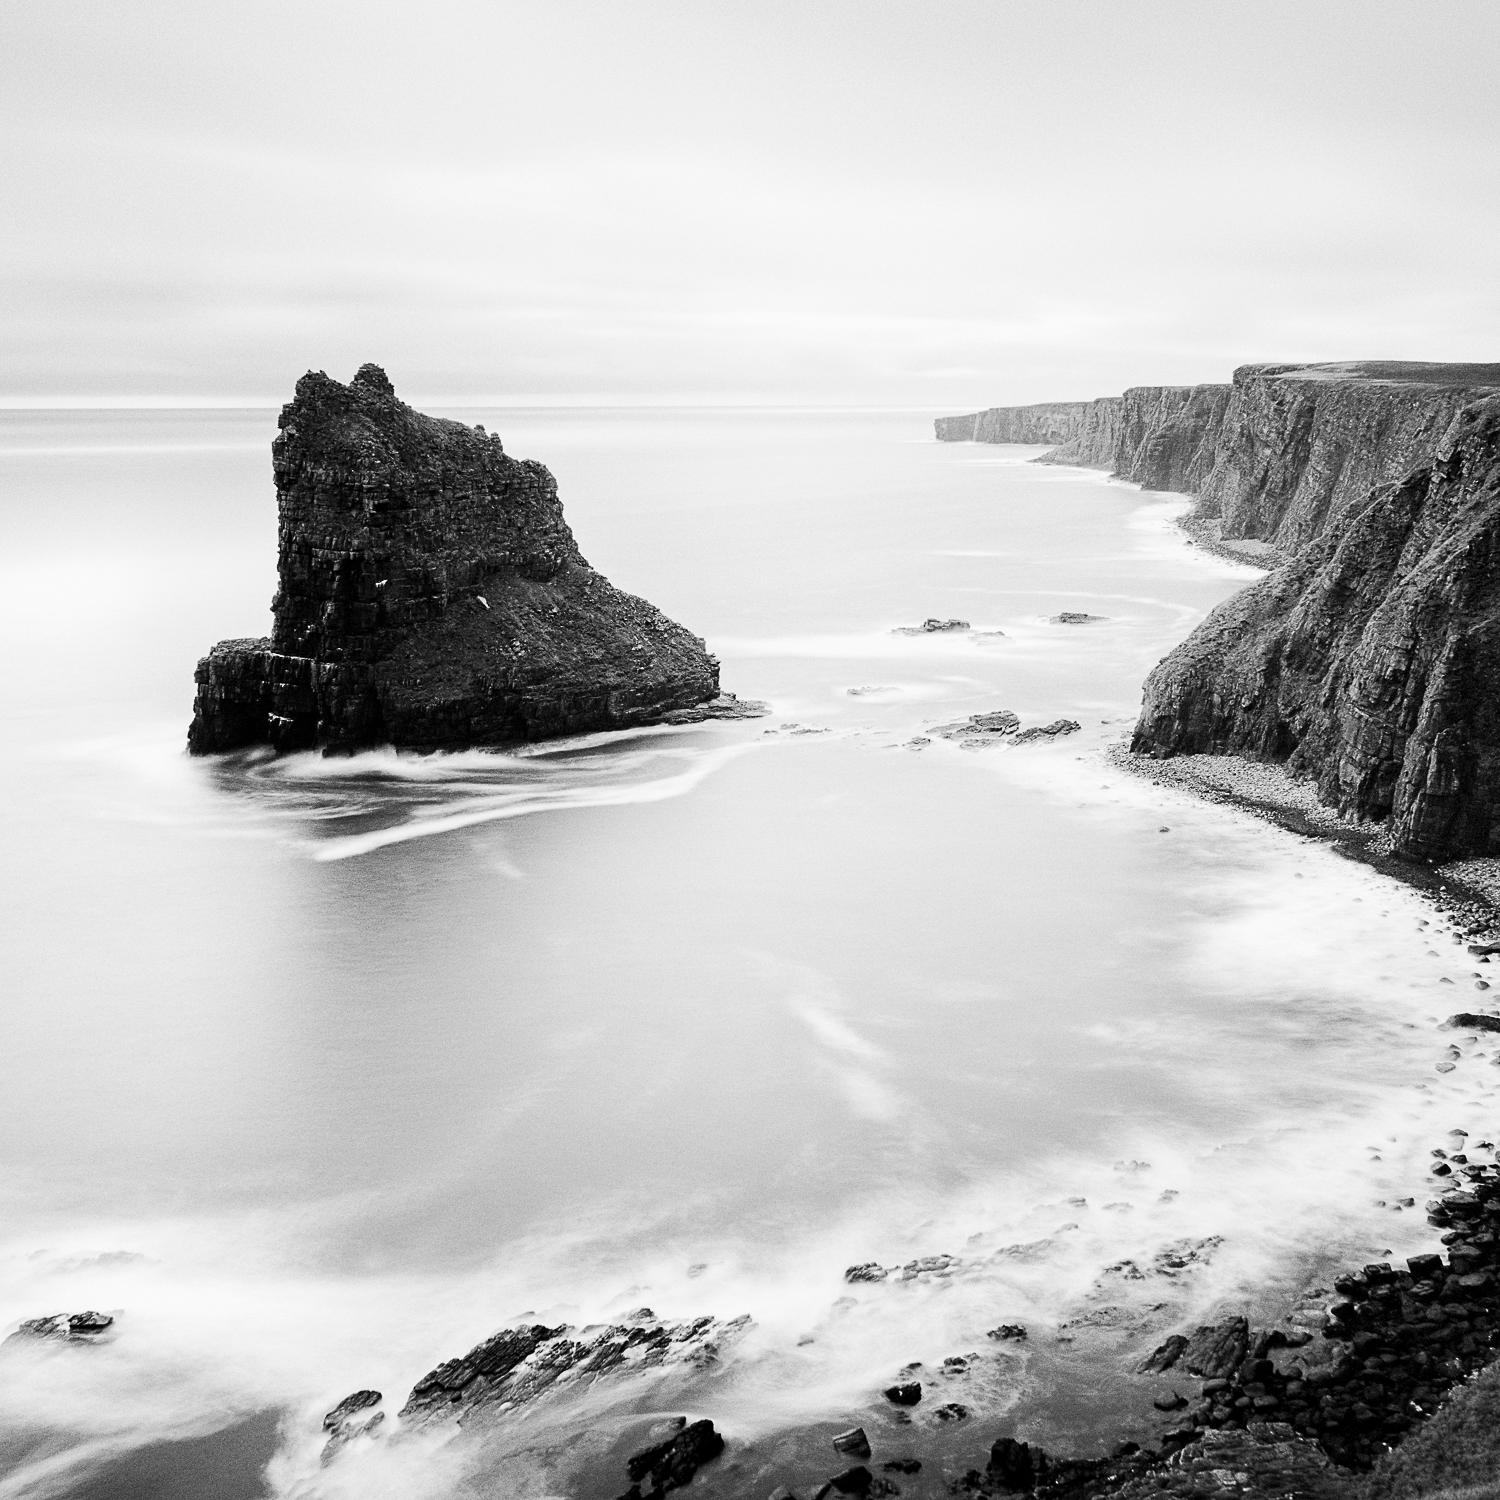 Surreal Moment, Cliffs, Rocks, Scotland, black white fineart photography, framed - Contemporary Photograph by Gerald Berghammer